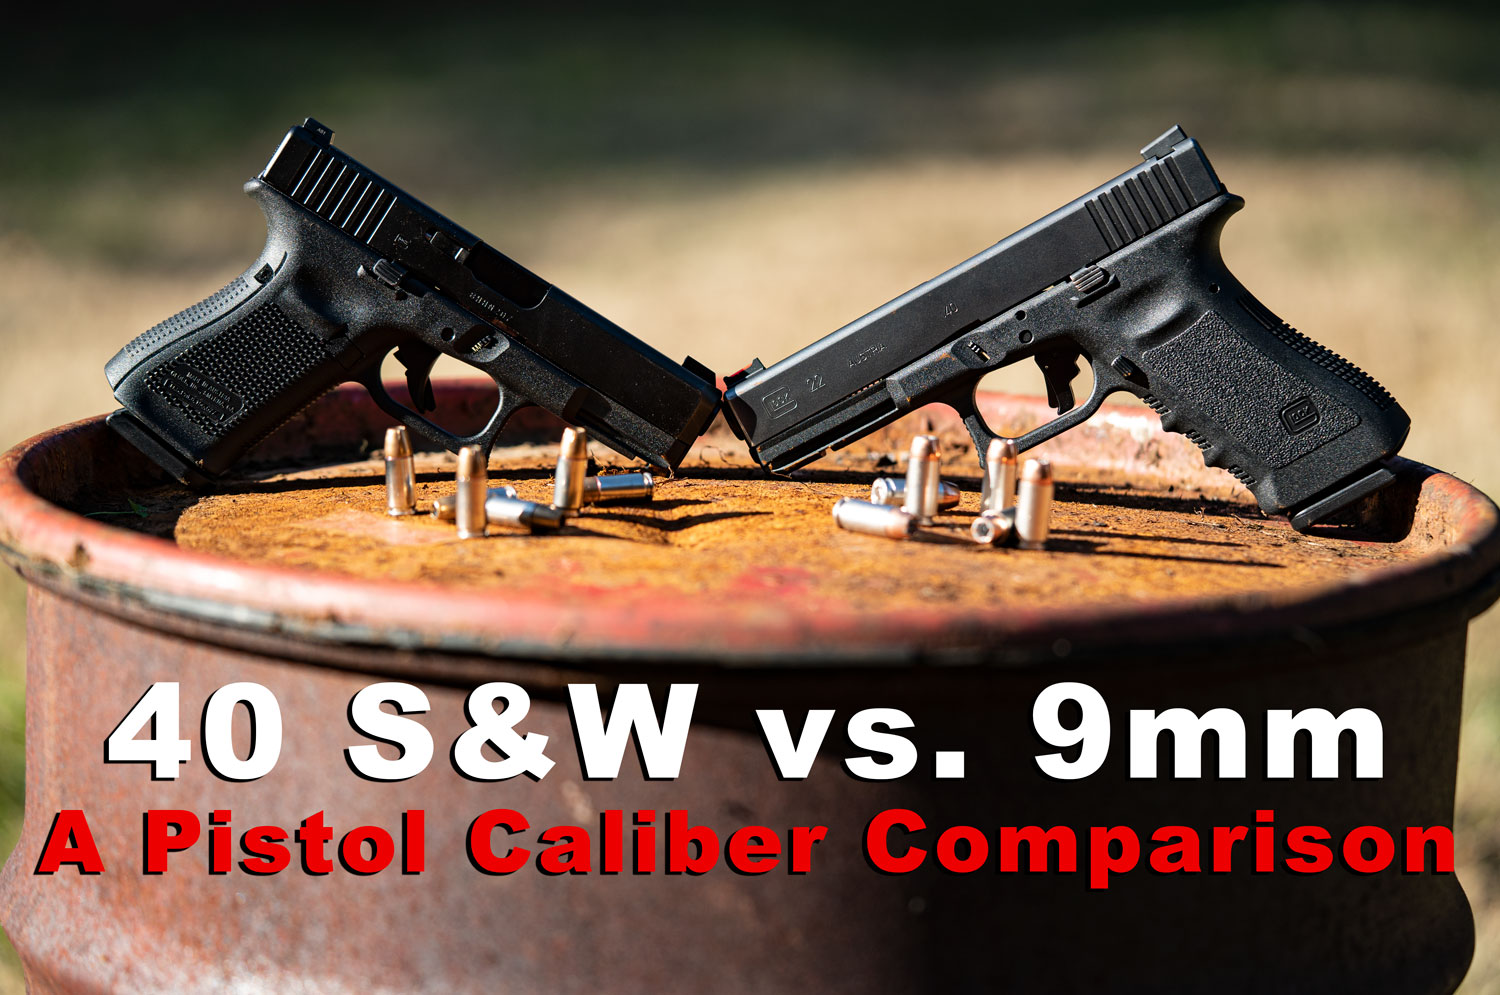 40 S&W and 9mm pistols on a barrel top